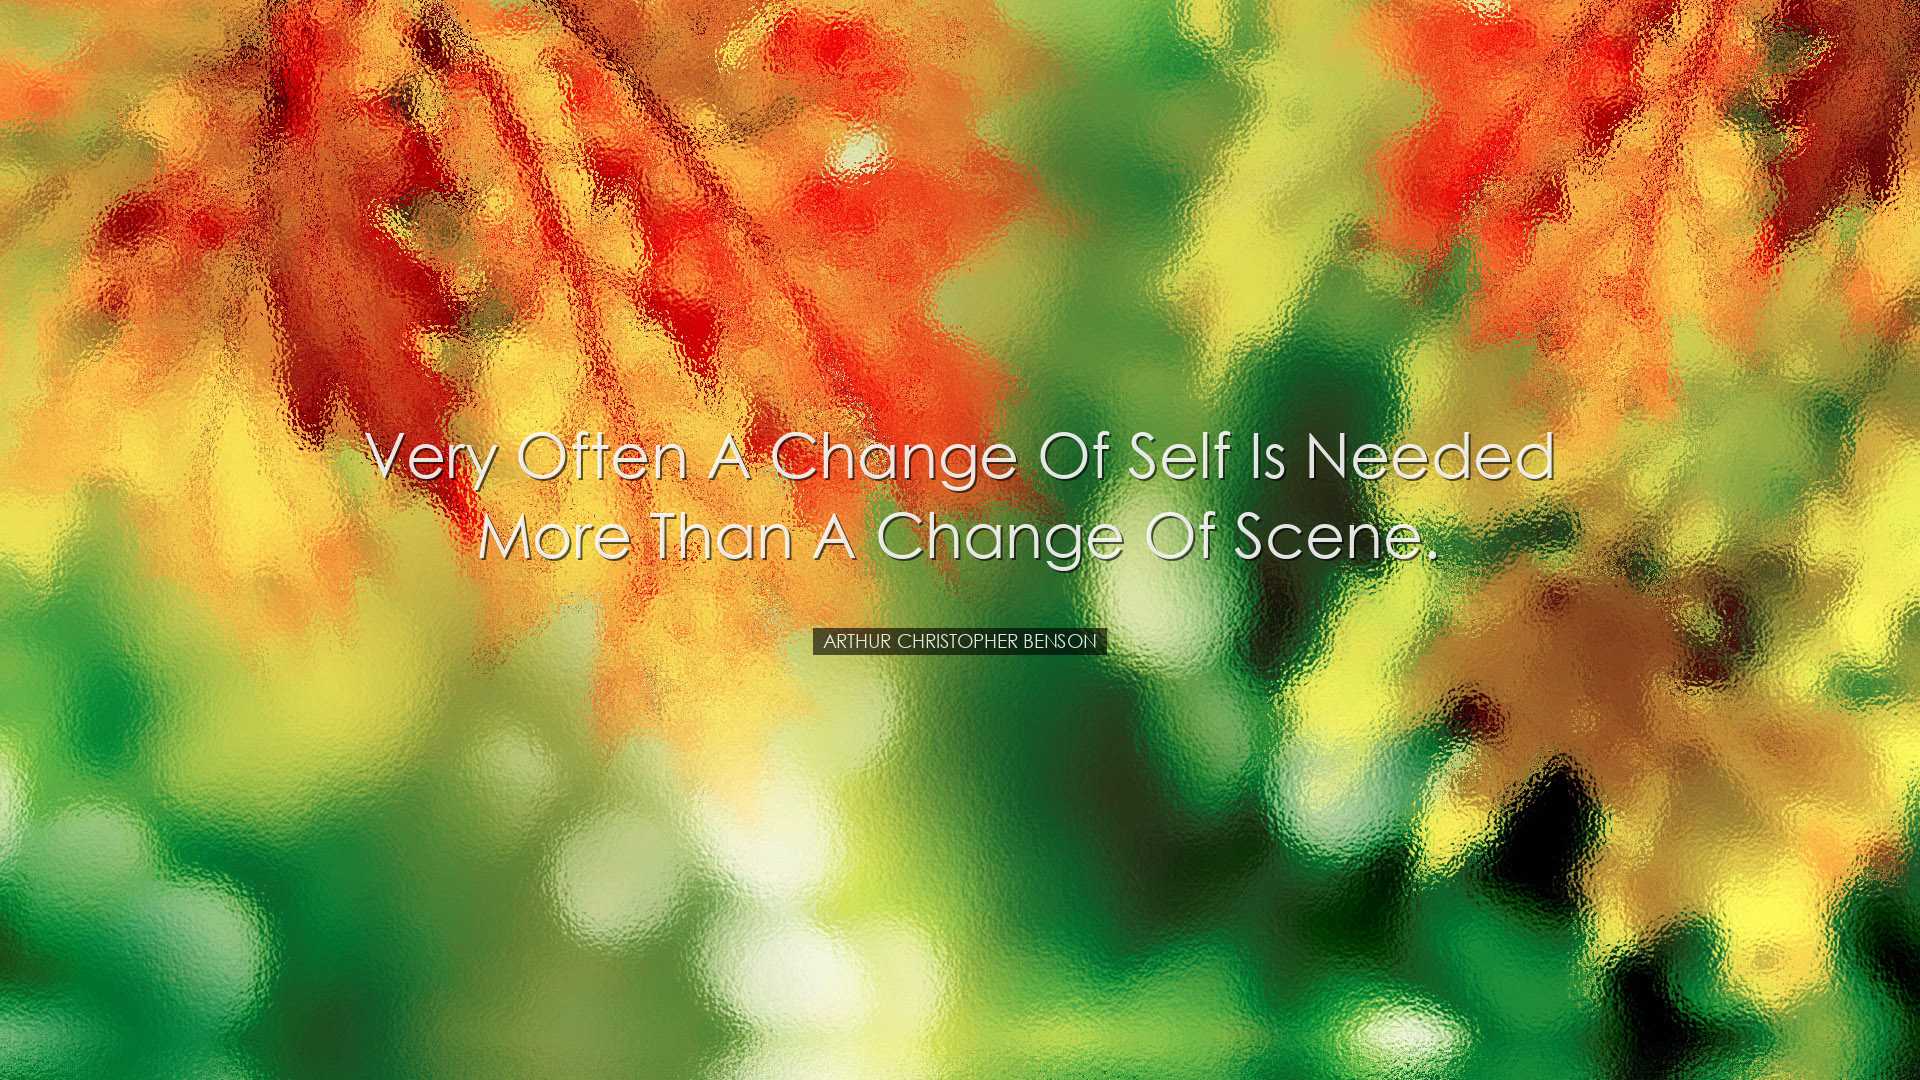 Very often a change of self is needed more than a change of scene.